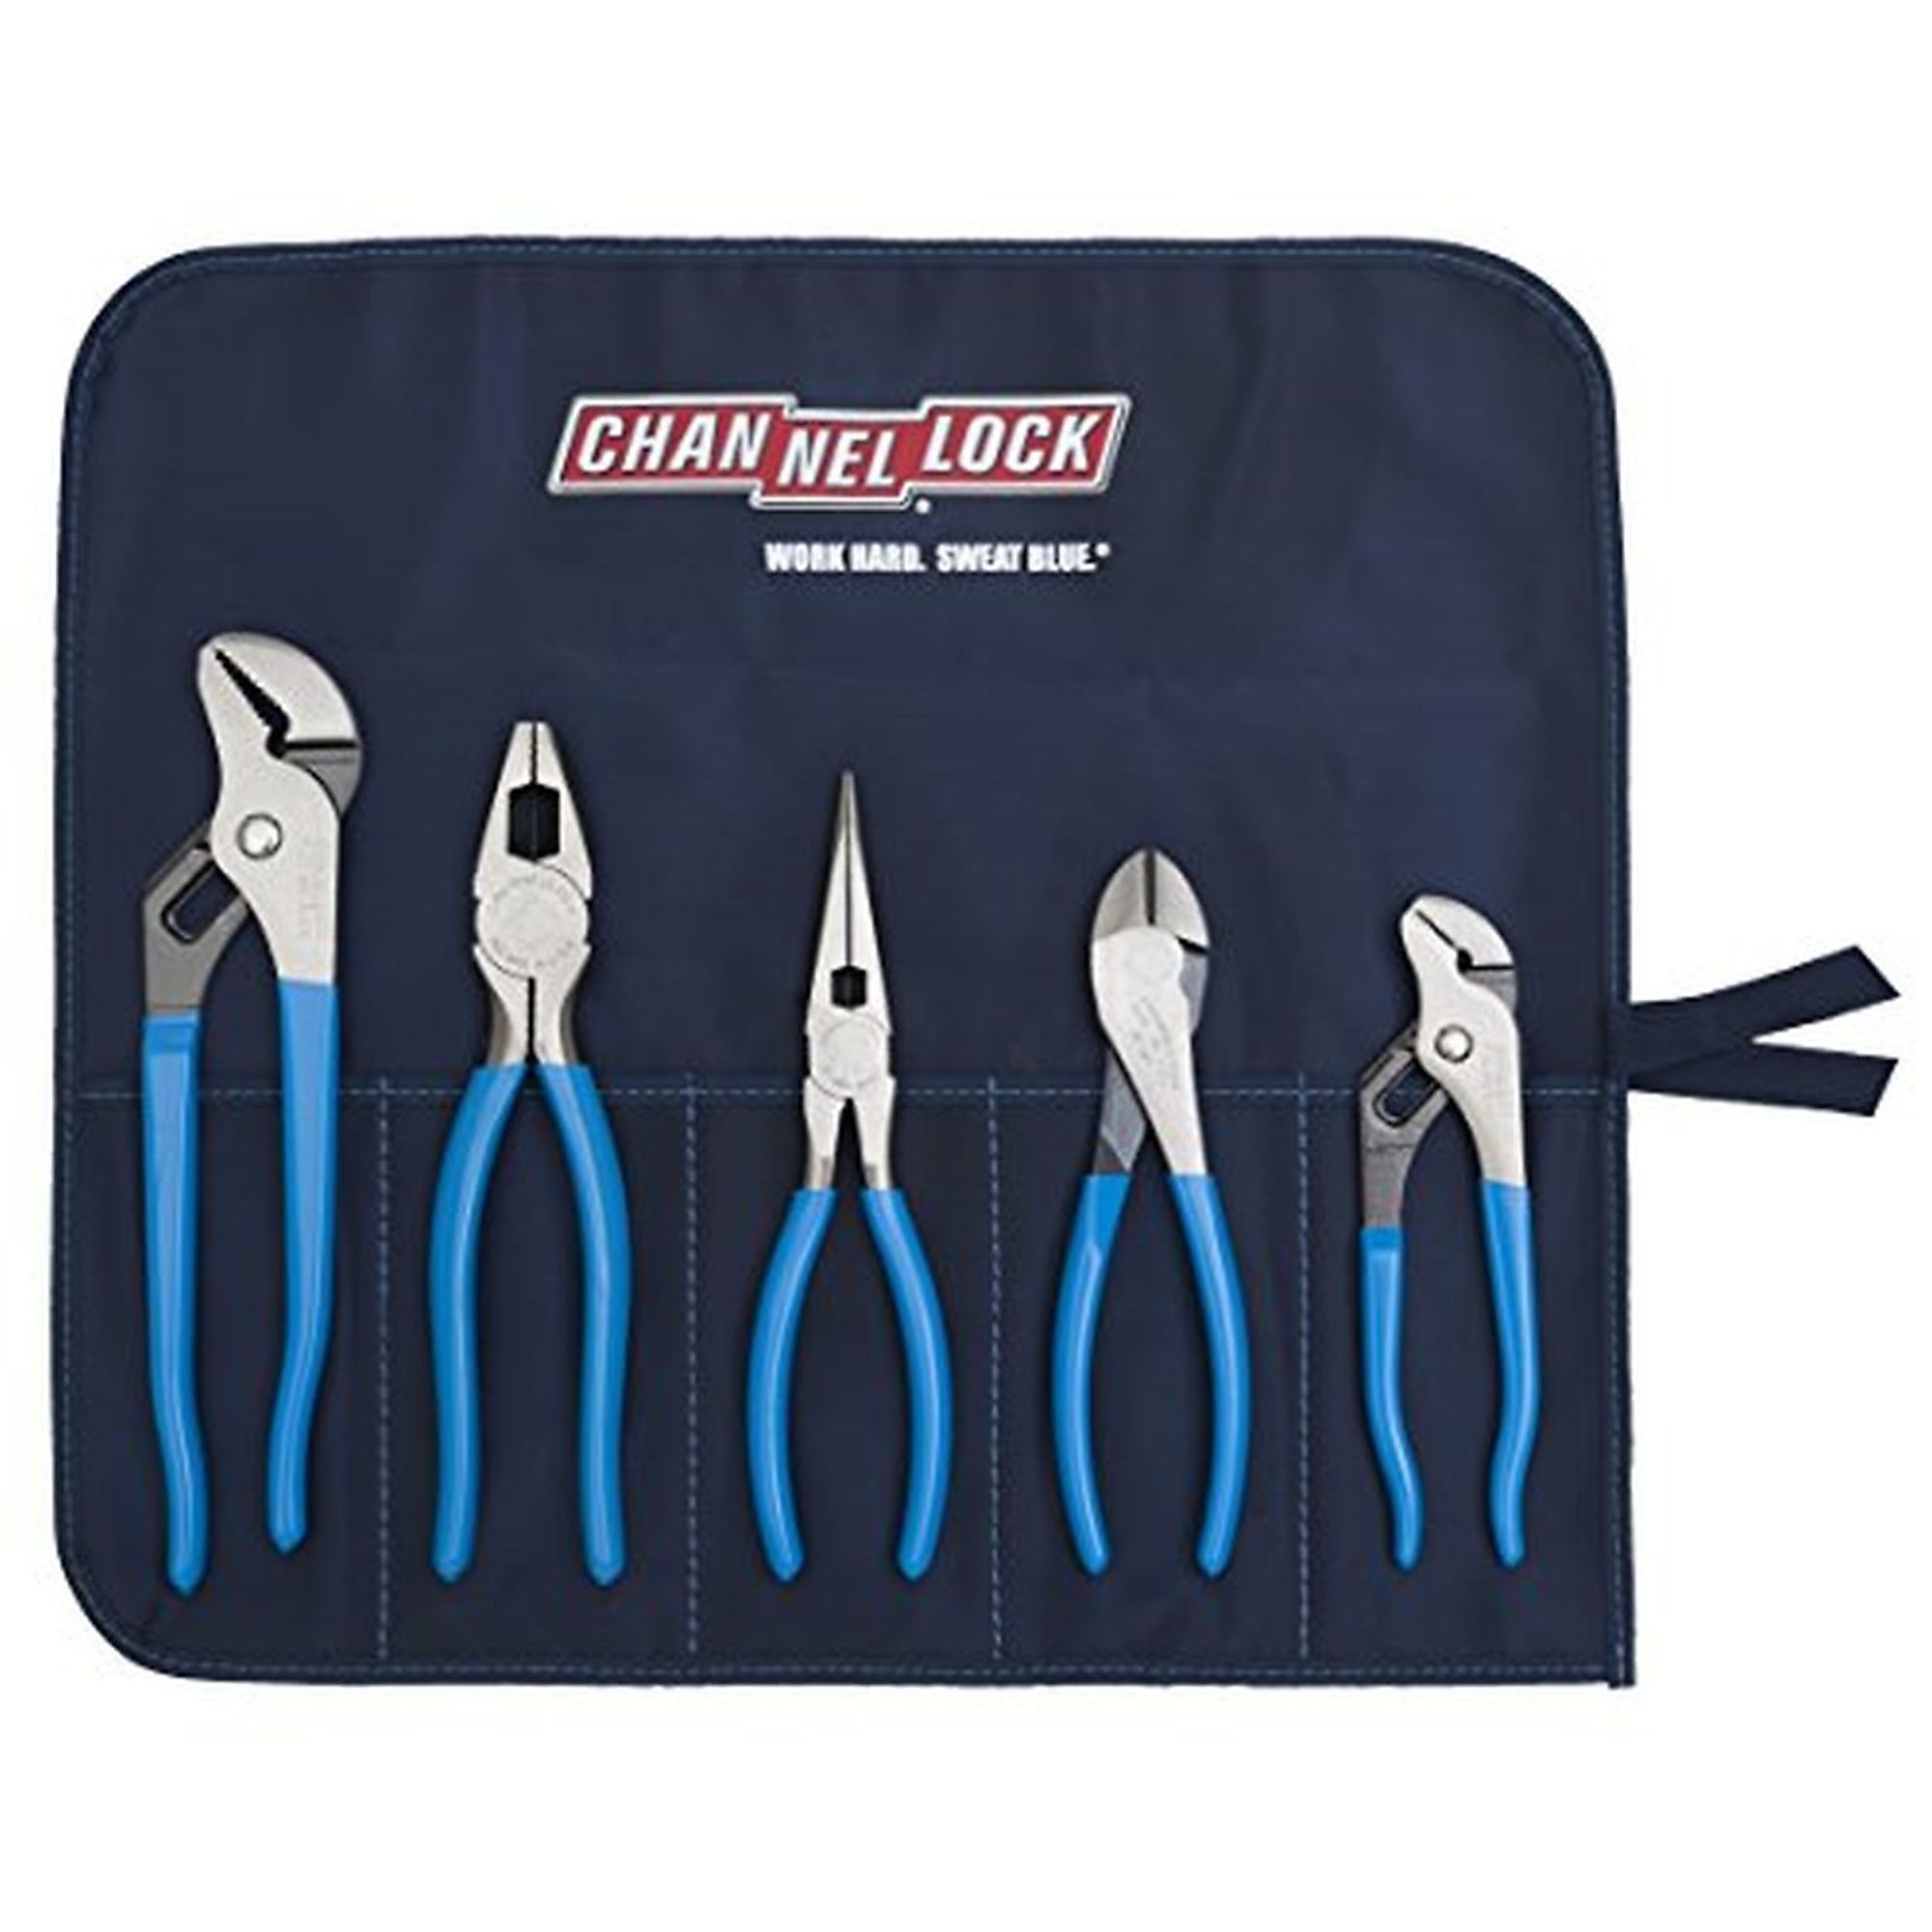 Channellock, 5 piece Professional Tool Set, Model TOOL ROLL-5 -  387-TOOL ROLL-5